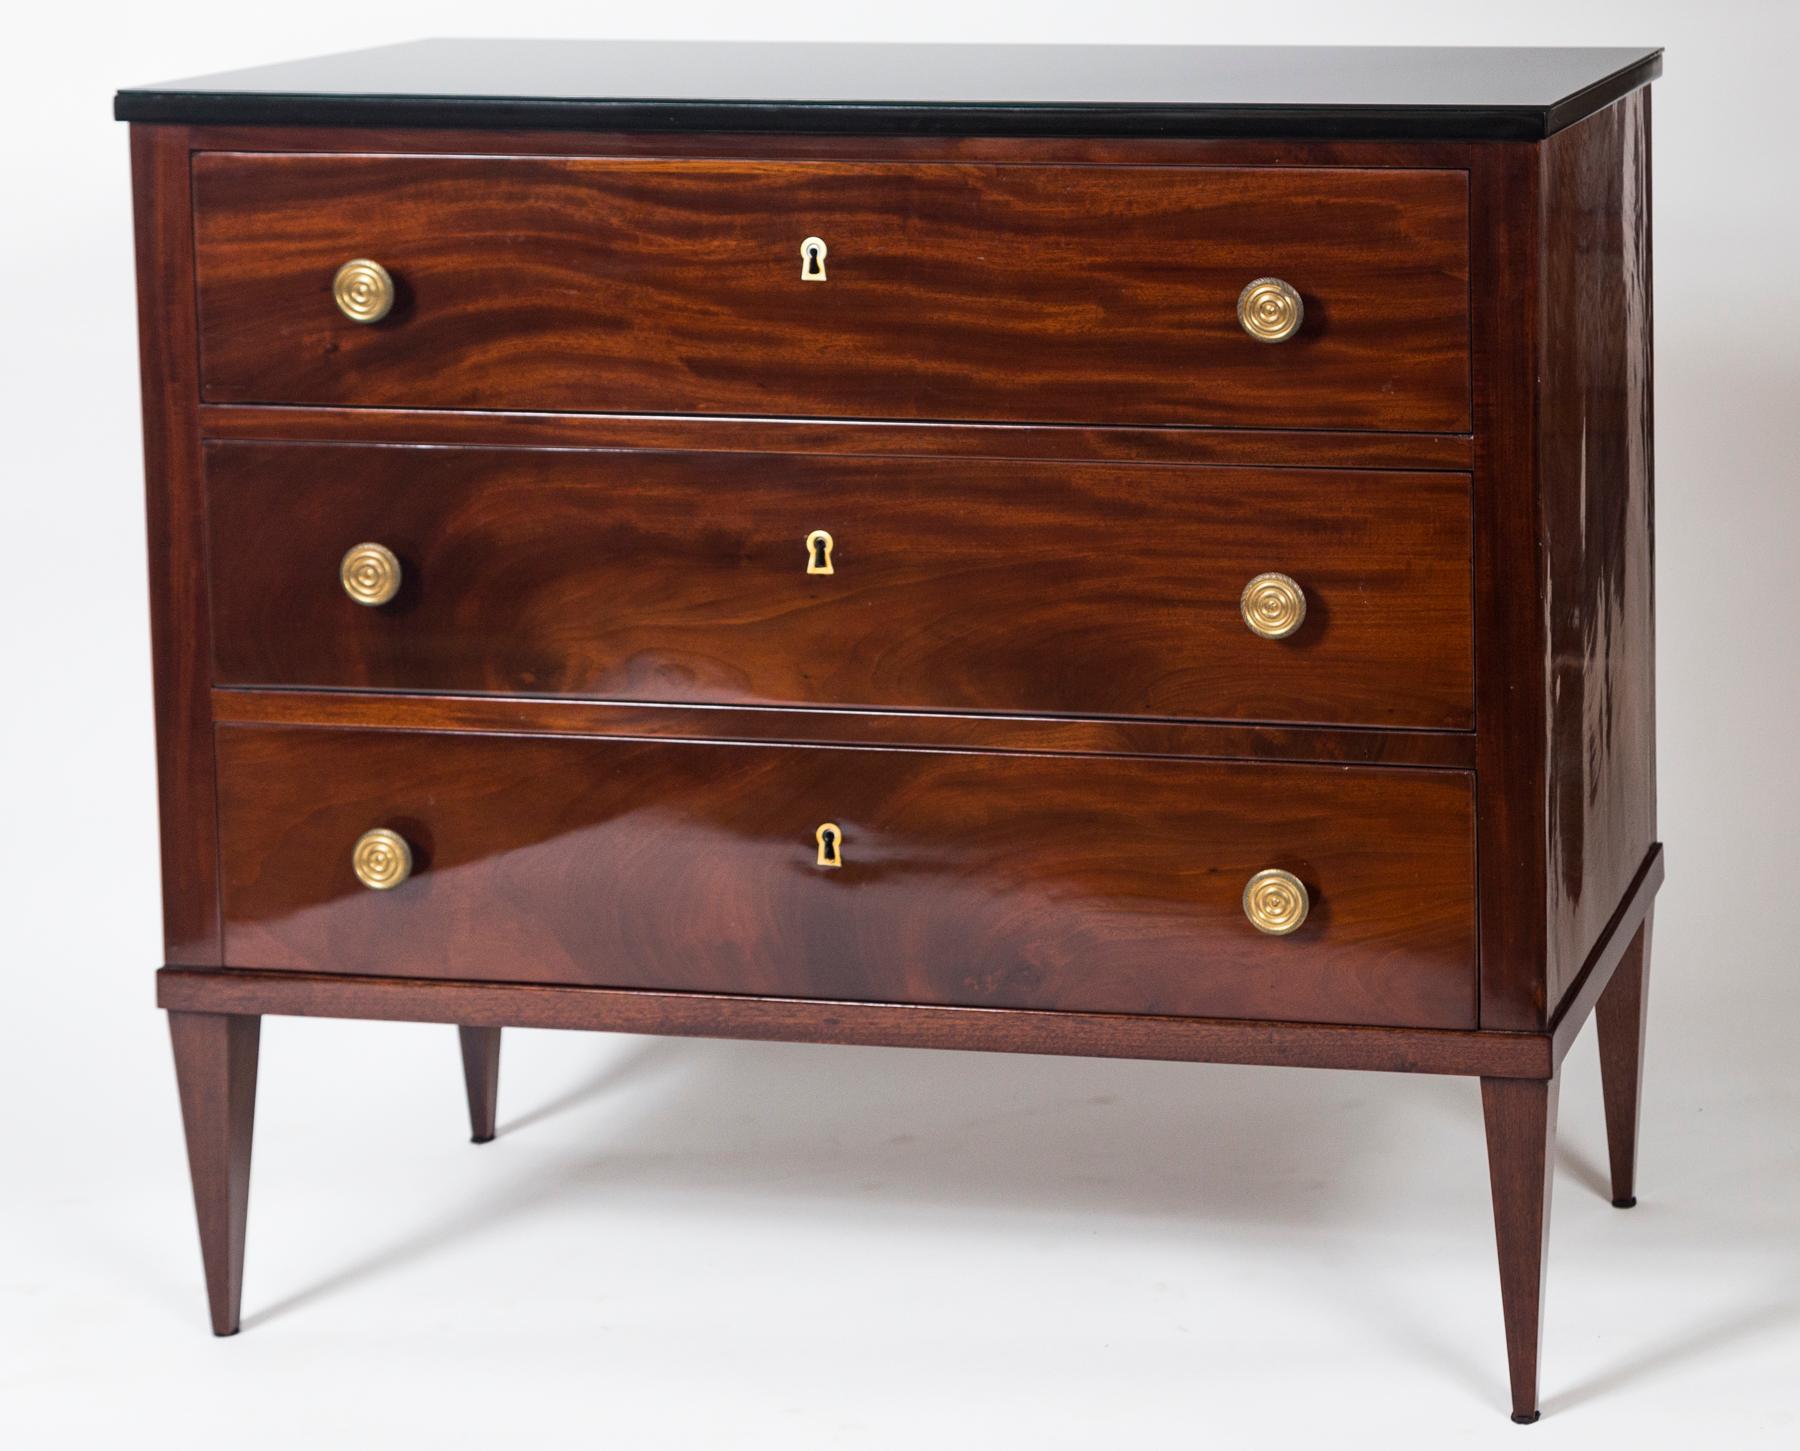 A fine pair of mahogany veneer chest comprised of three drawers finishing on high straight tapered legs and adorned with bronze pulls. Shown with a refurbished black glass top creating an elegant and modernized feel.

Dating: 1825ca

Origin: Berlin,